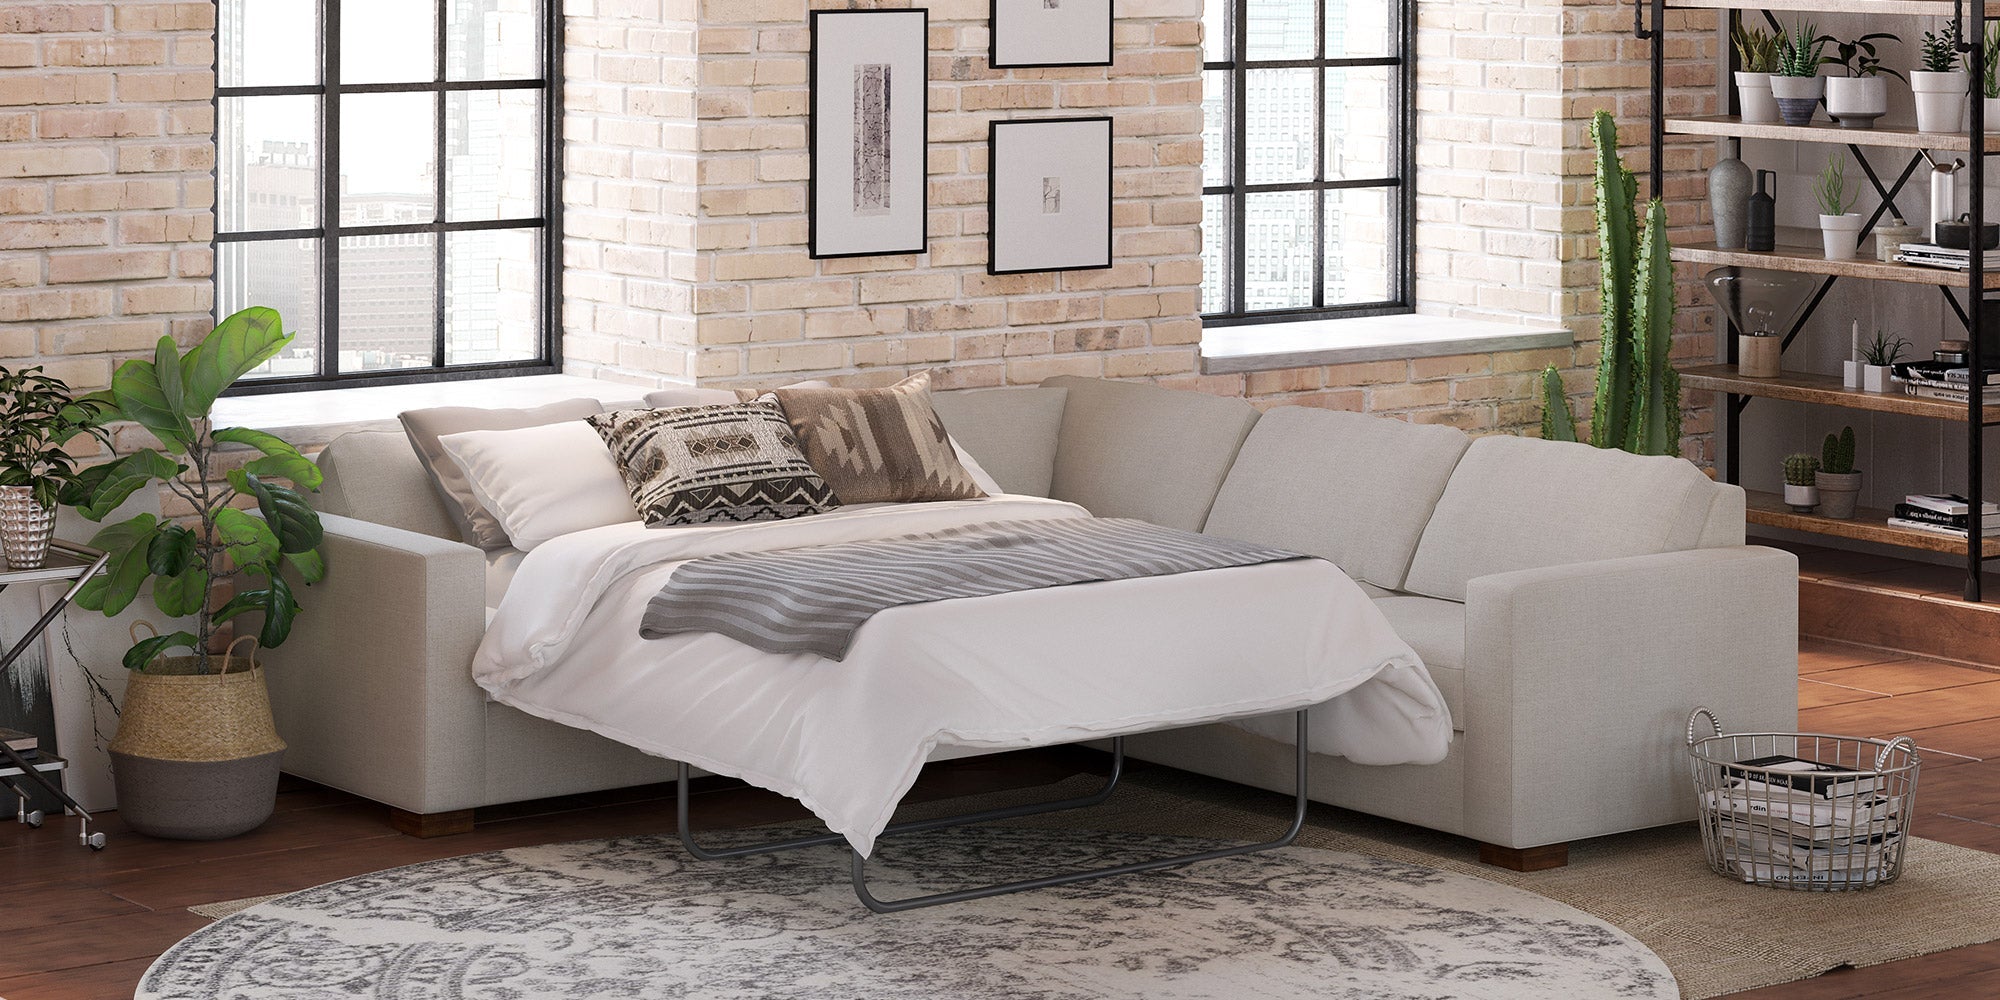 IRL: Rio Corner Queen Sleeper Sectional, shown here in Texture Oyster fabric and Dave Cafe legs.